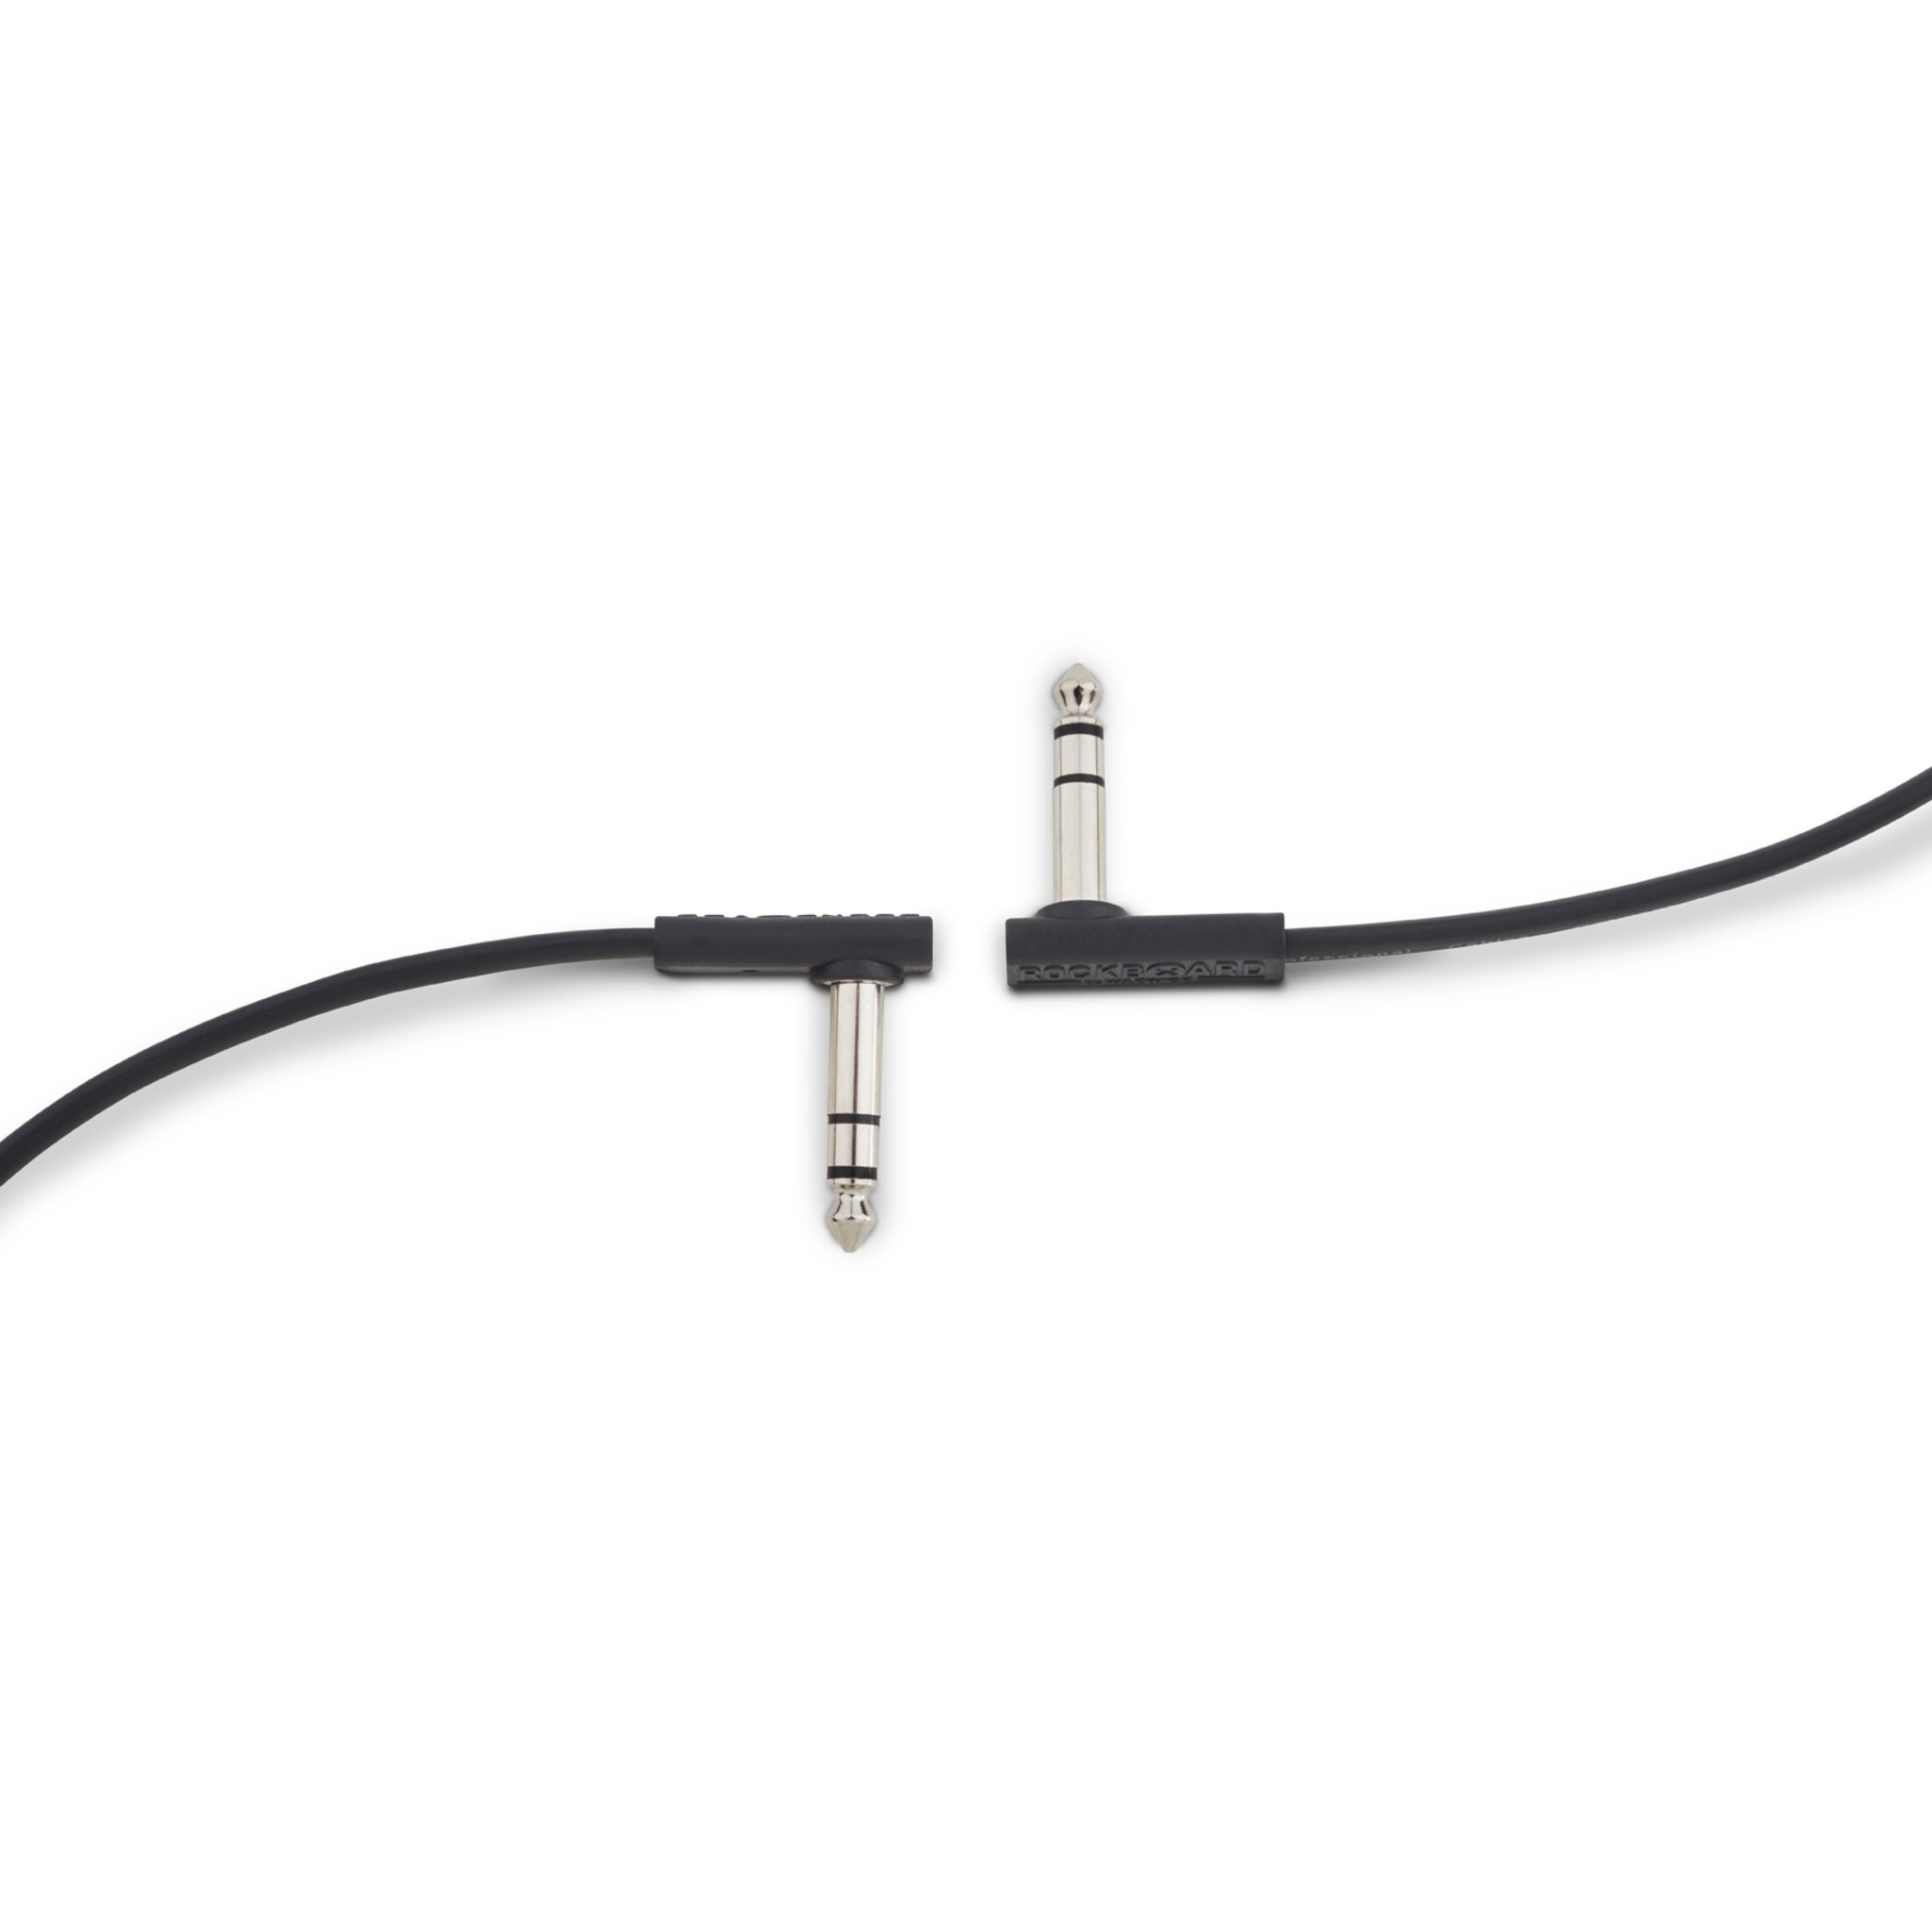 Rockboard Flat Patch TRS Cable, 300 cm / 9.84 ft, Black, low profile, for switch & expression pedals